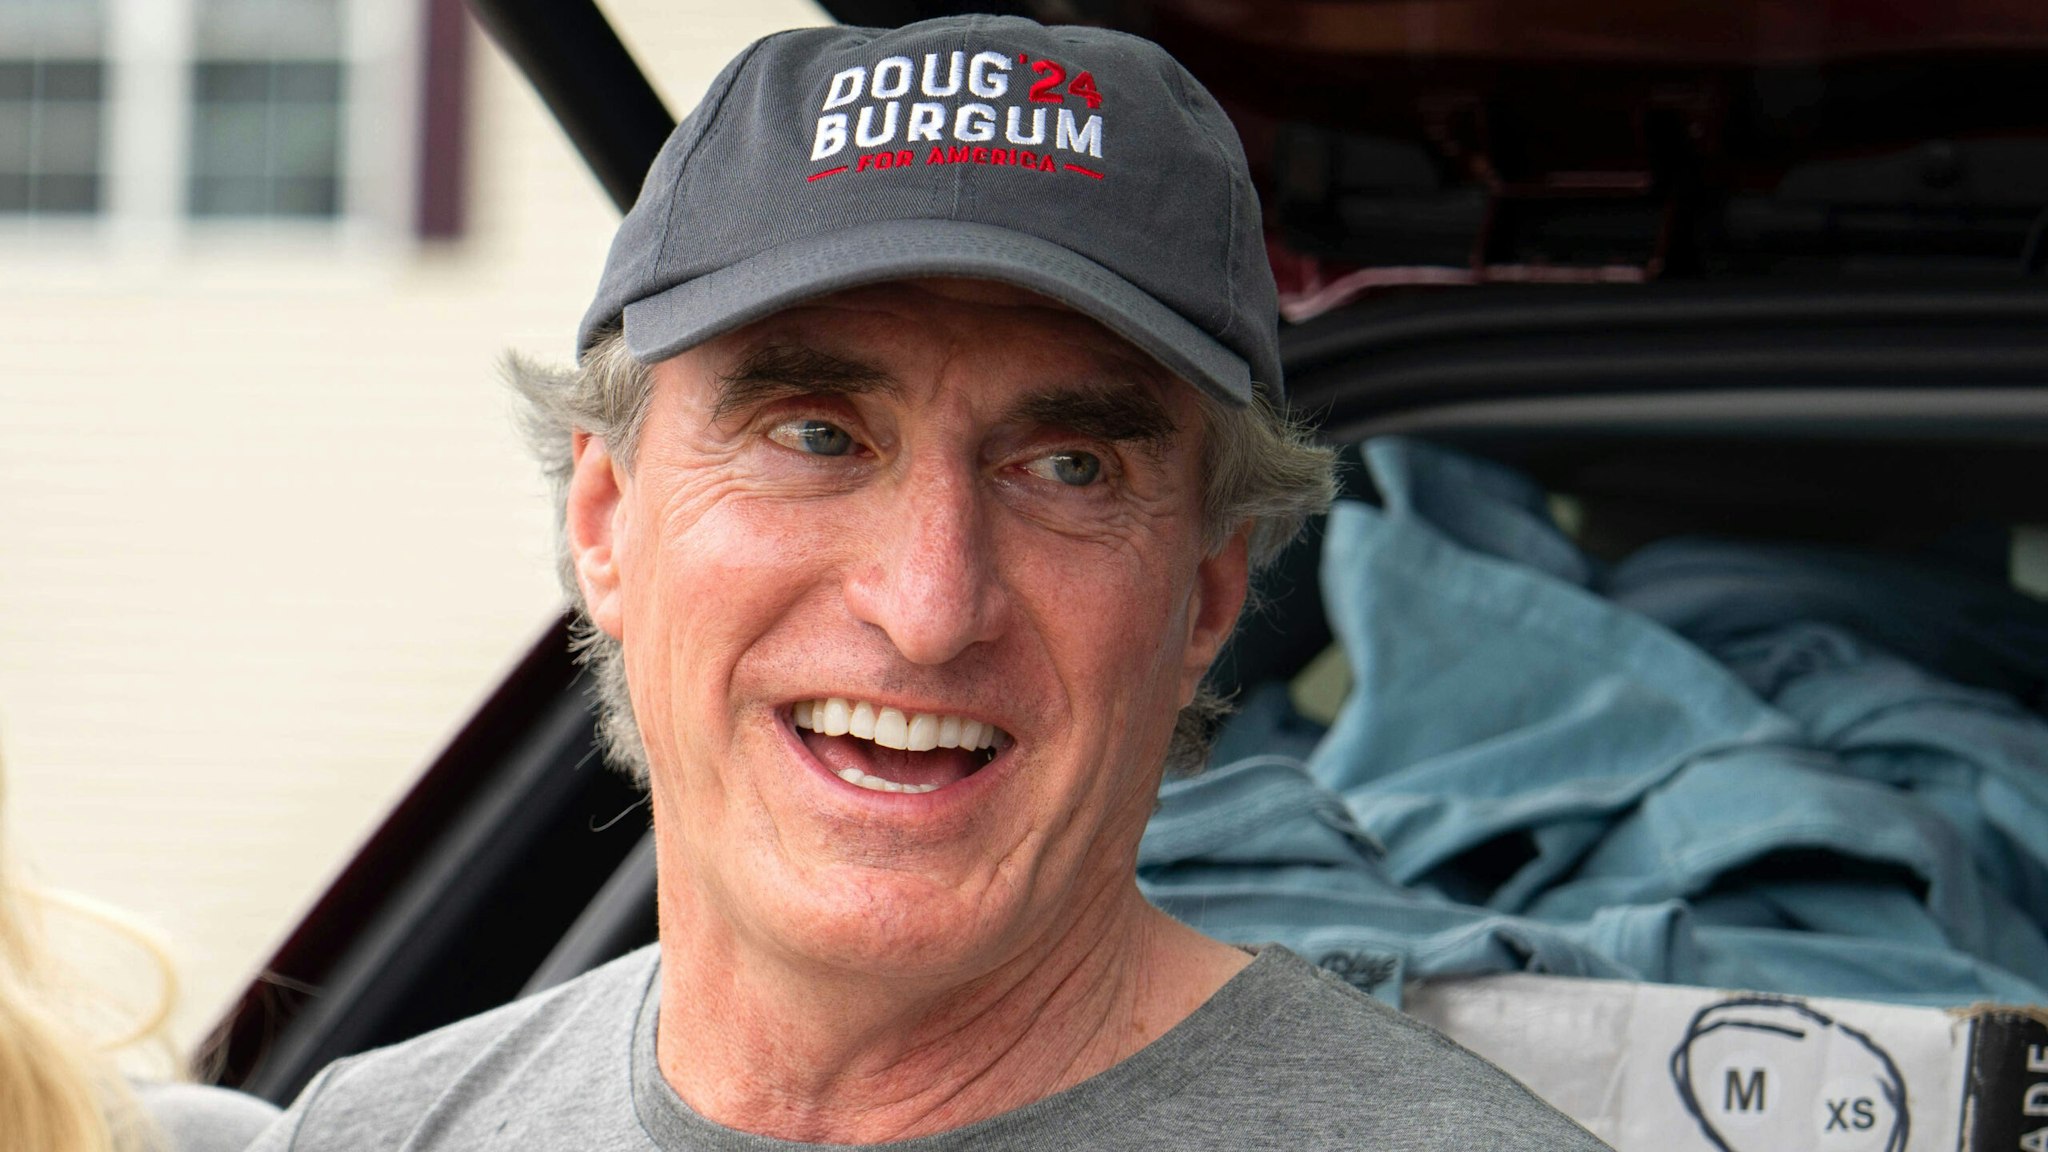 Doug Burgum, governor of North Dakota, right, attends the Independence Day parade in Merrimack, New Hampshire, US, on Tuesday, July 4, 2023. Republican presidential candidates face an early test this month of whether they can raise enough money to sustain their campaigns through party primaries and break away from a growing GOP field.